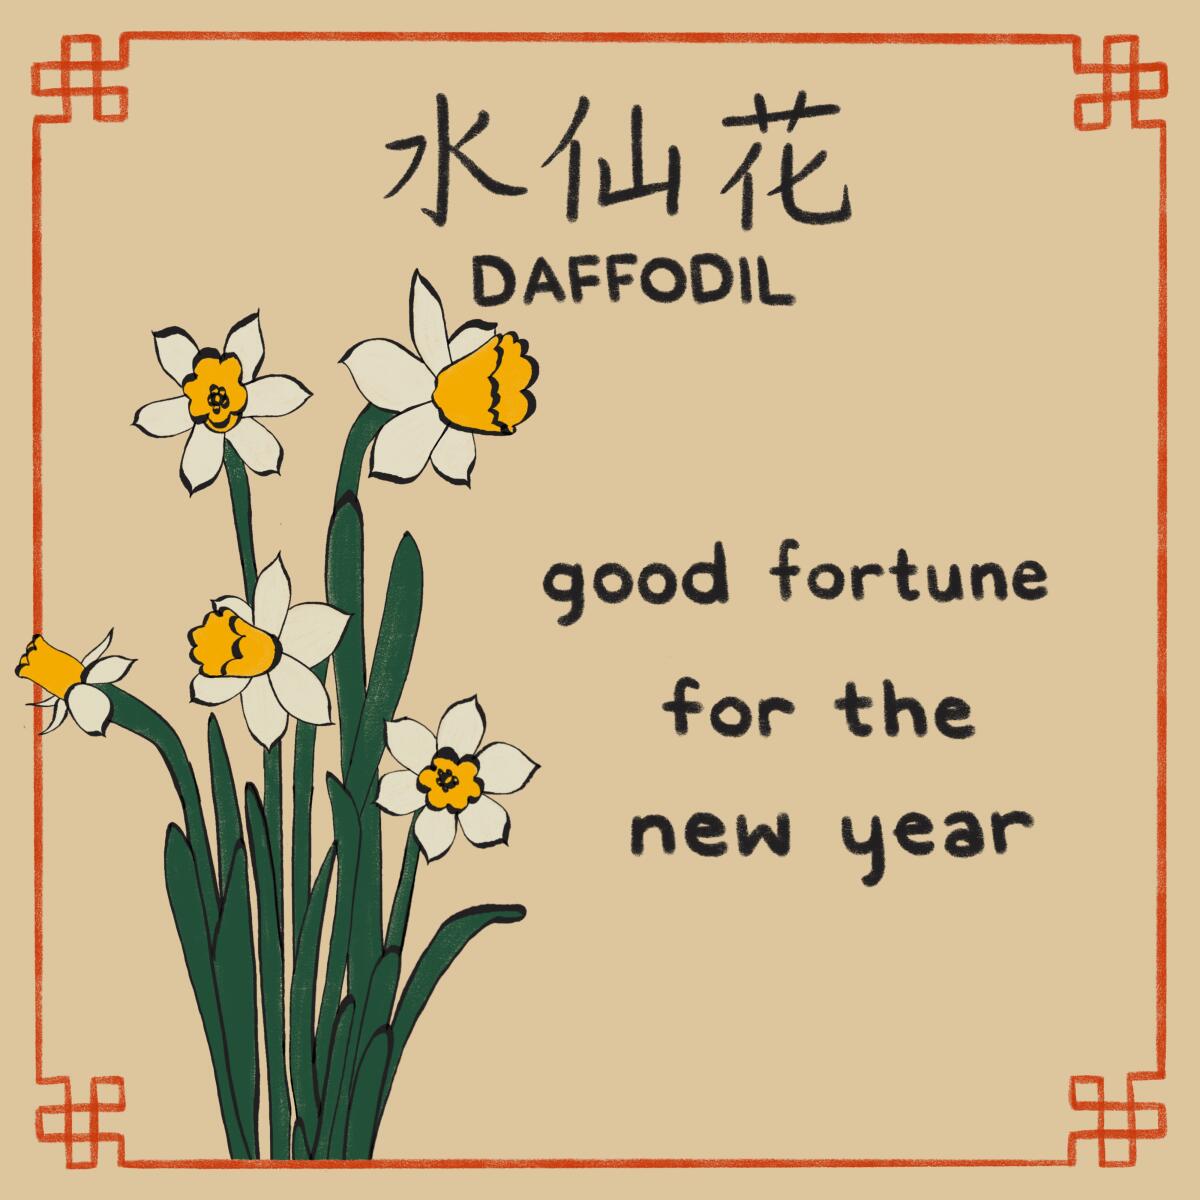 Illustration of Daffodils with the words "good fortune for the new year"